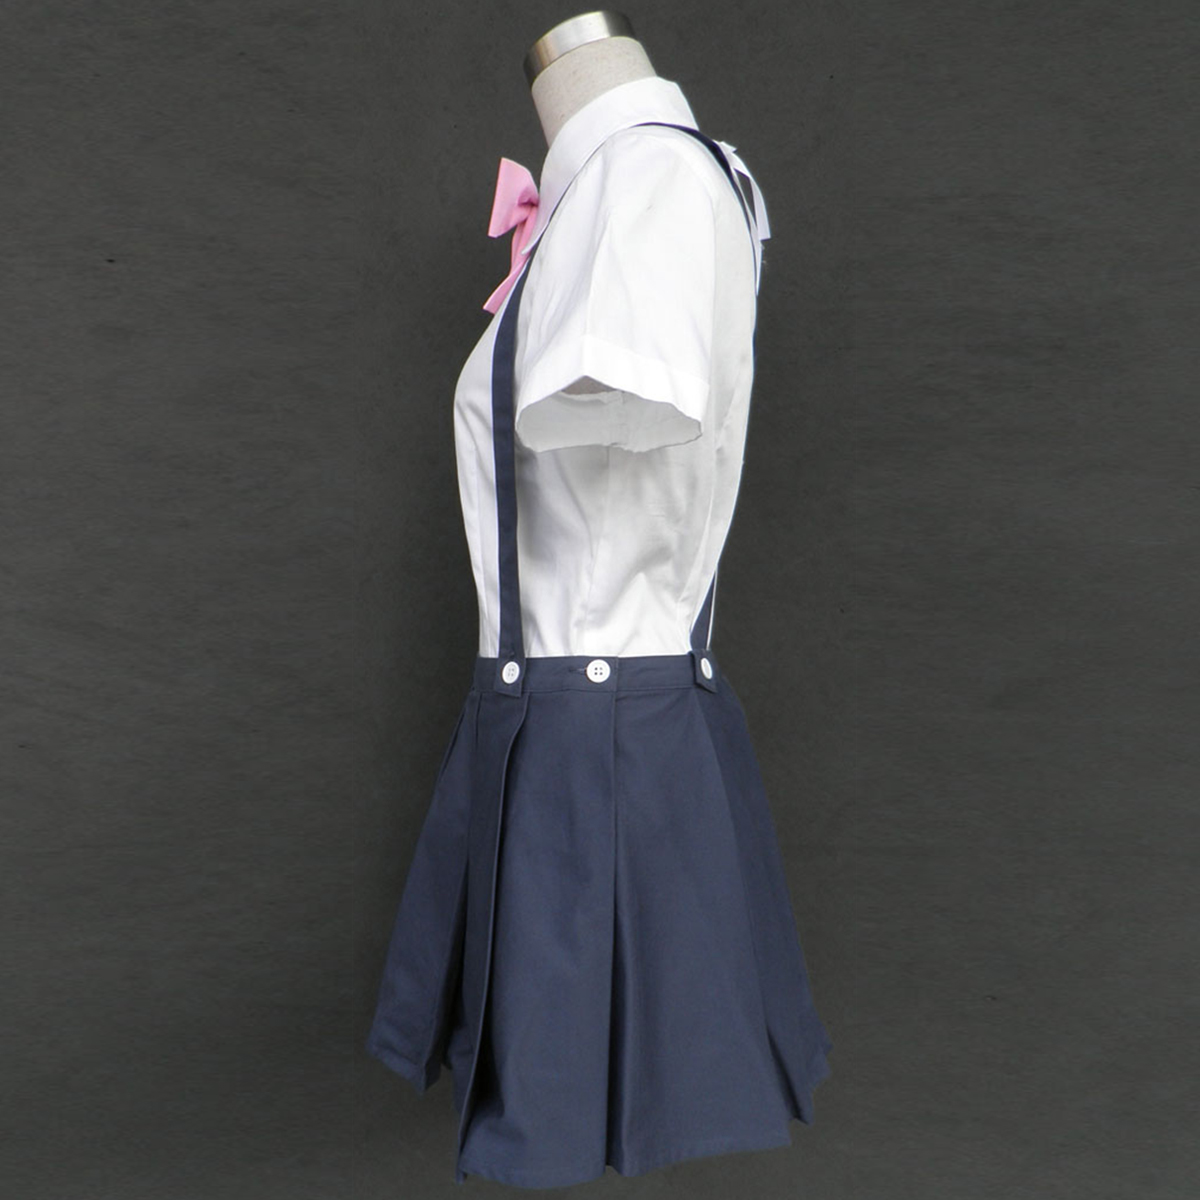 Higurashi When They Cry Furude Rika 1 Anime Cosplay Costumes Outfit